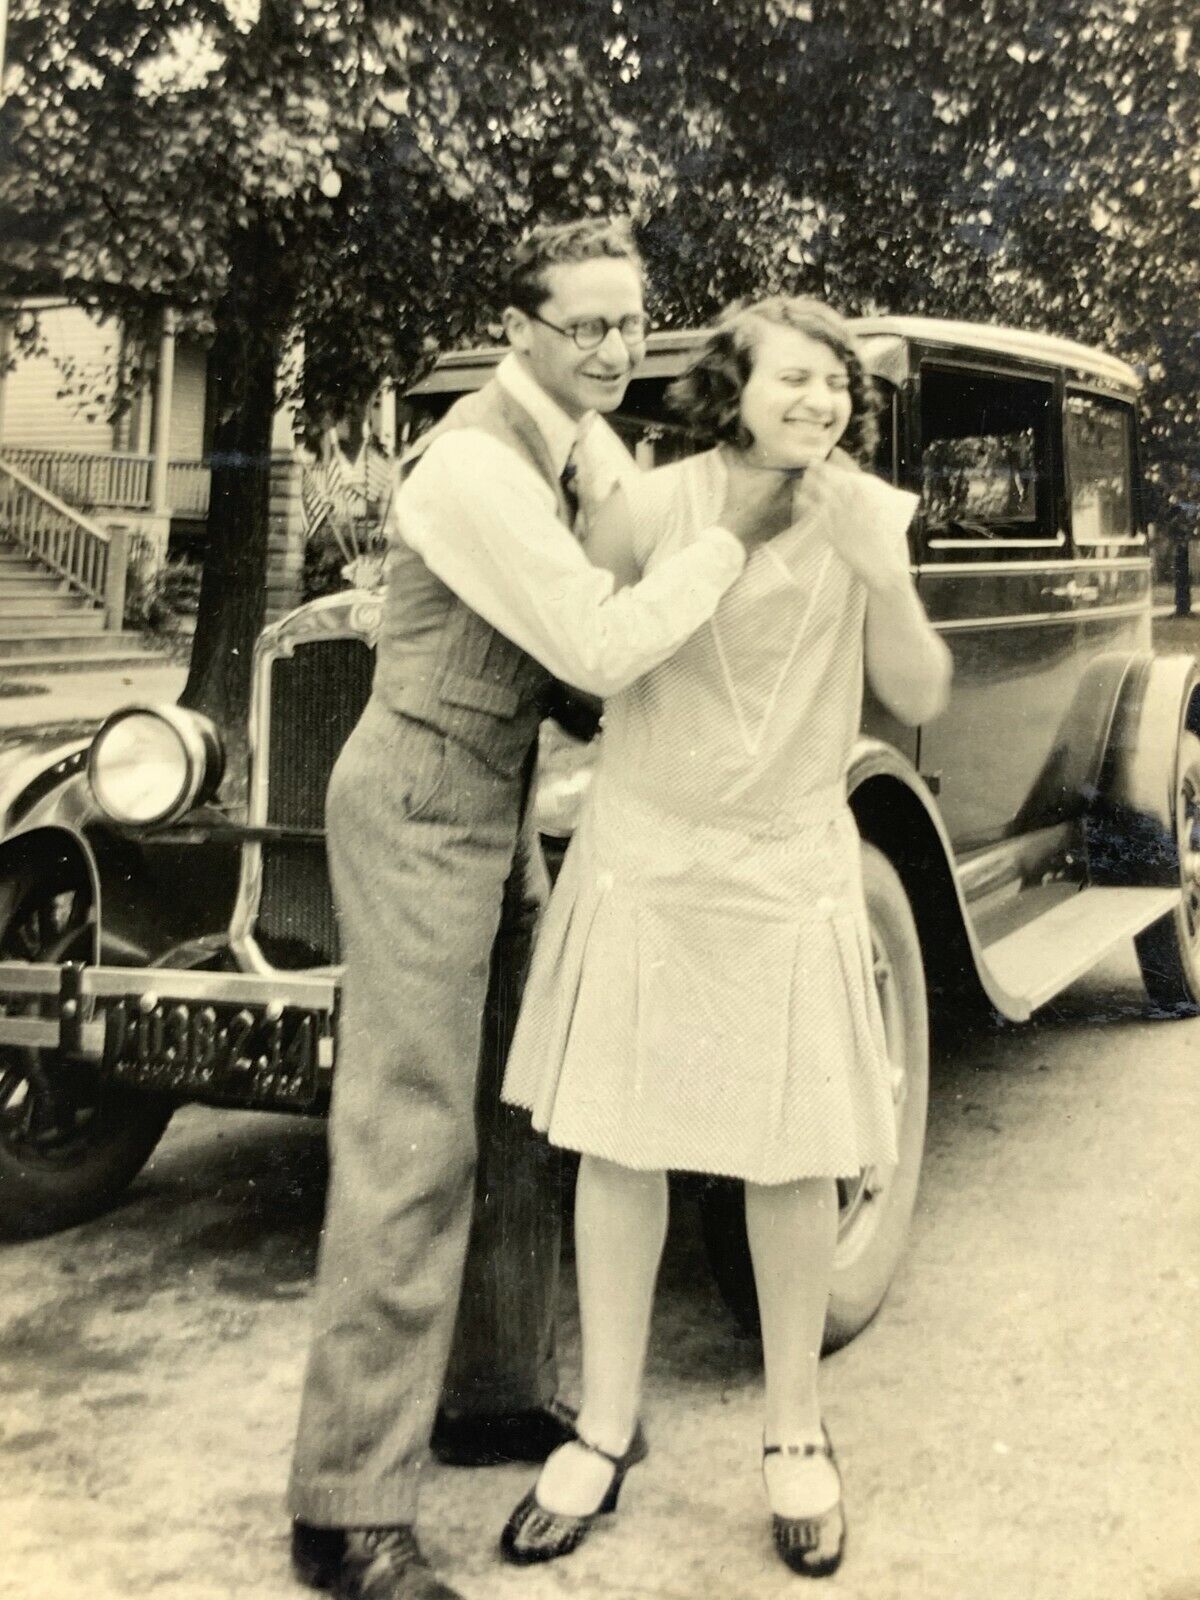 E7 Found Photograph 1929 Man Laughing Woman Old Car Funny Odd